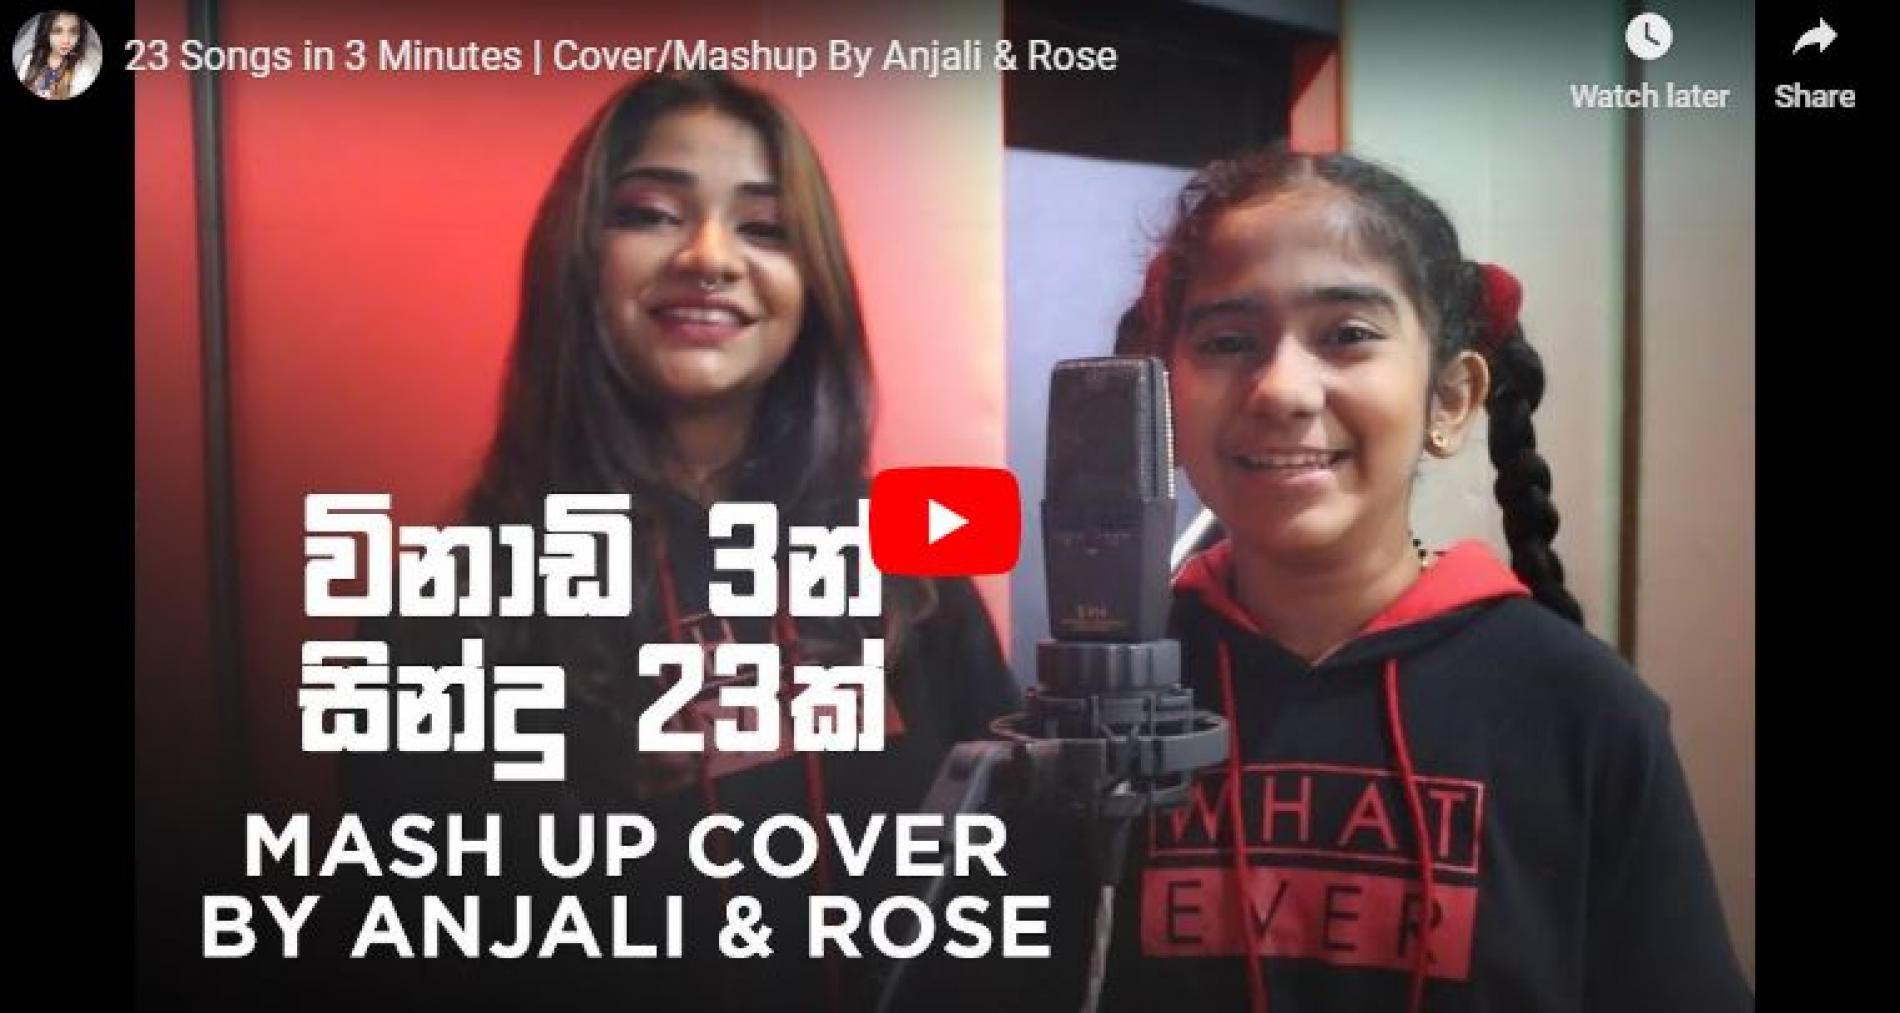 23 Songs in 3 Minutes – Cover Mashup By Anjali & Rose